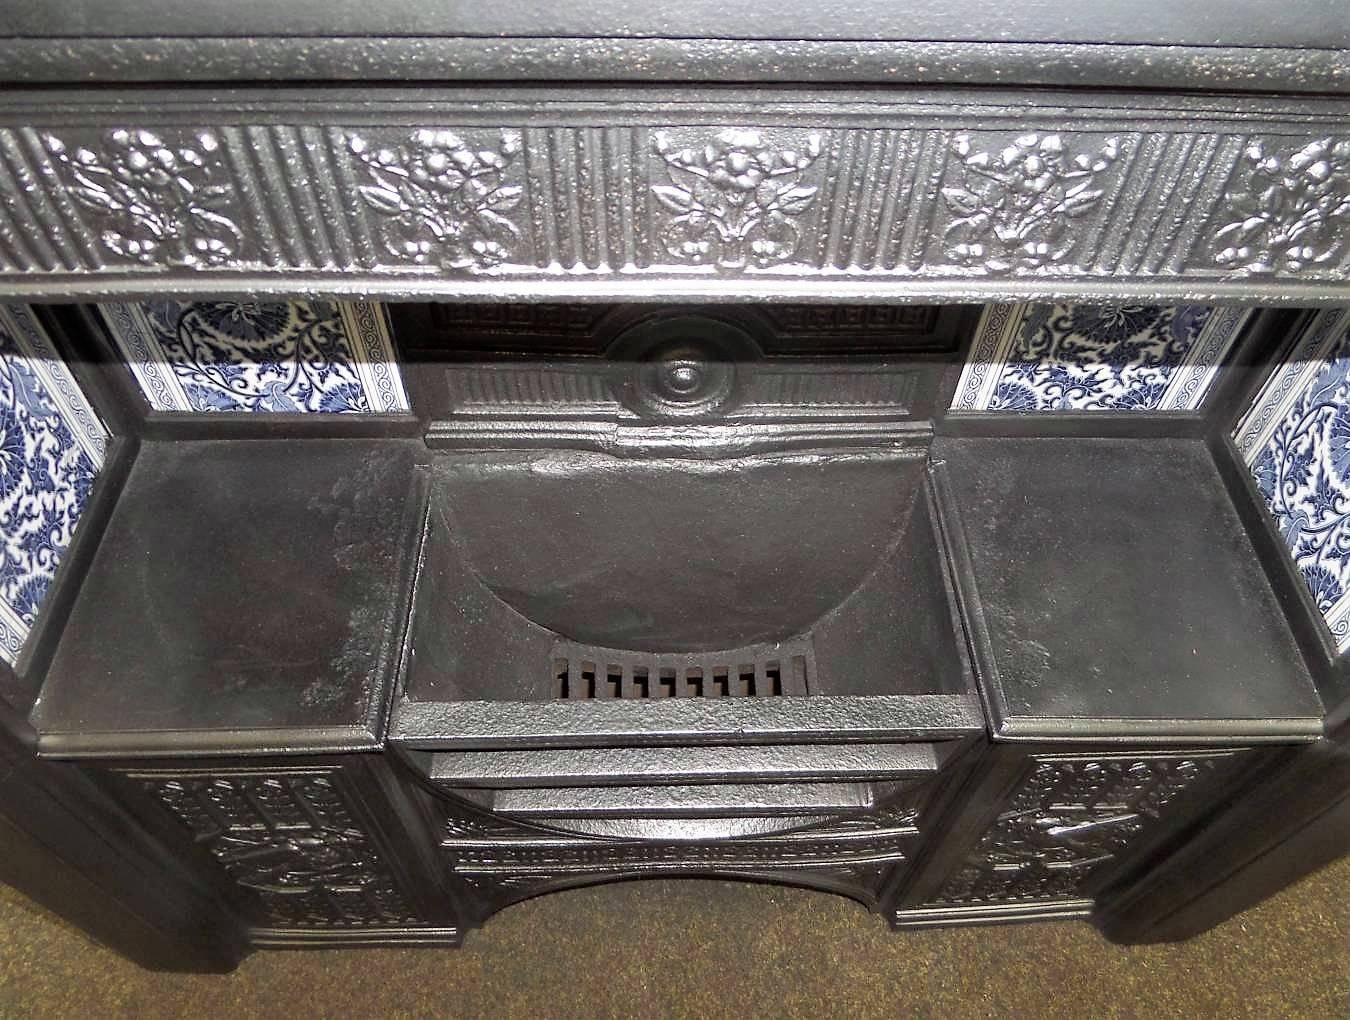 Antique 19th century Victorian hob grate fireplace Insert with William Morris antique Tiles. The hob grate is finished in a traditional black polish and complete with a chimney isolation damper plate. Dimensions are on the last picture.